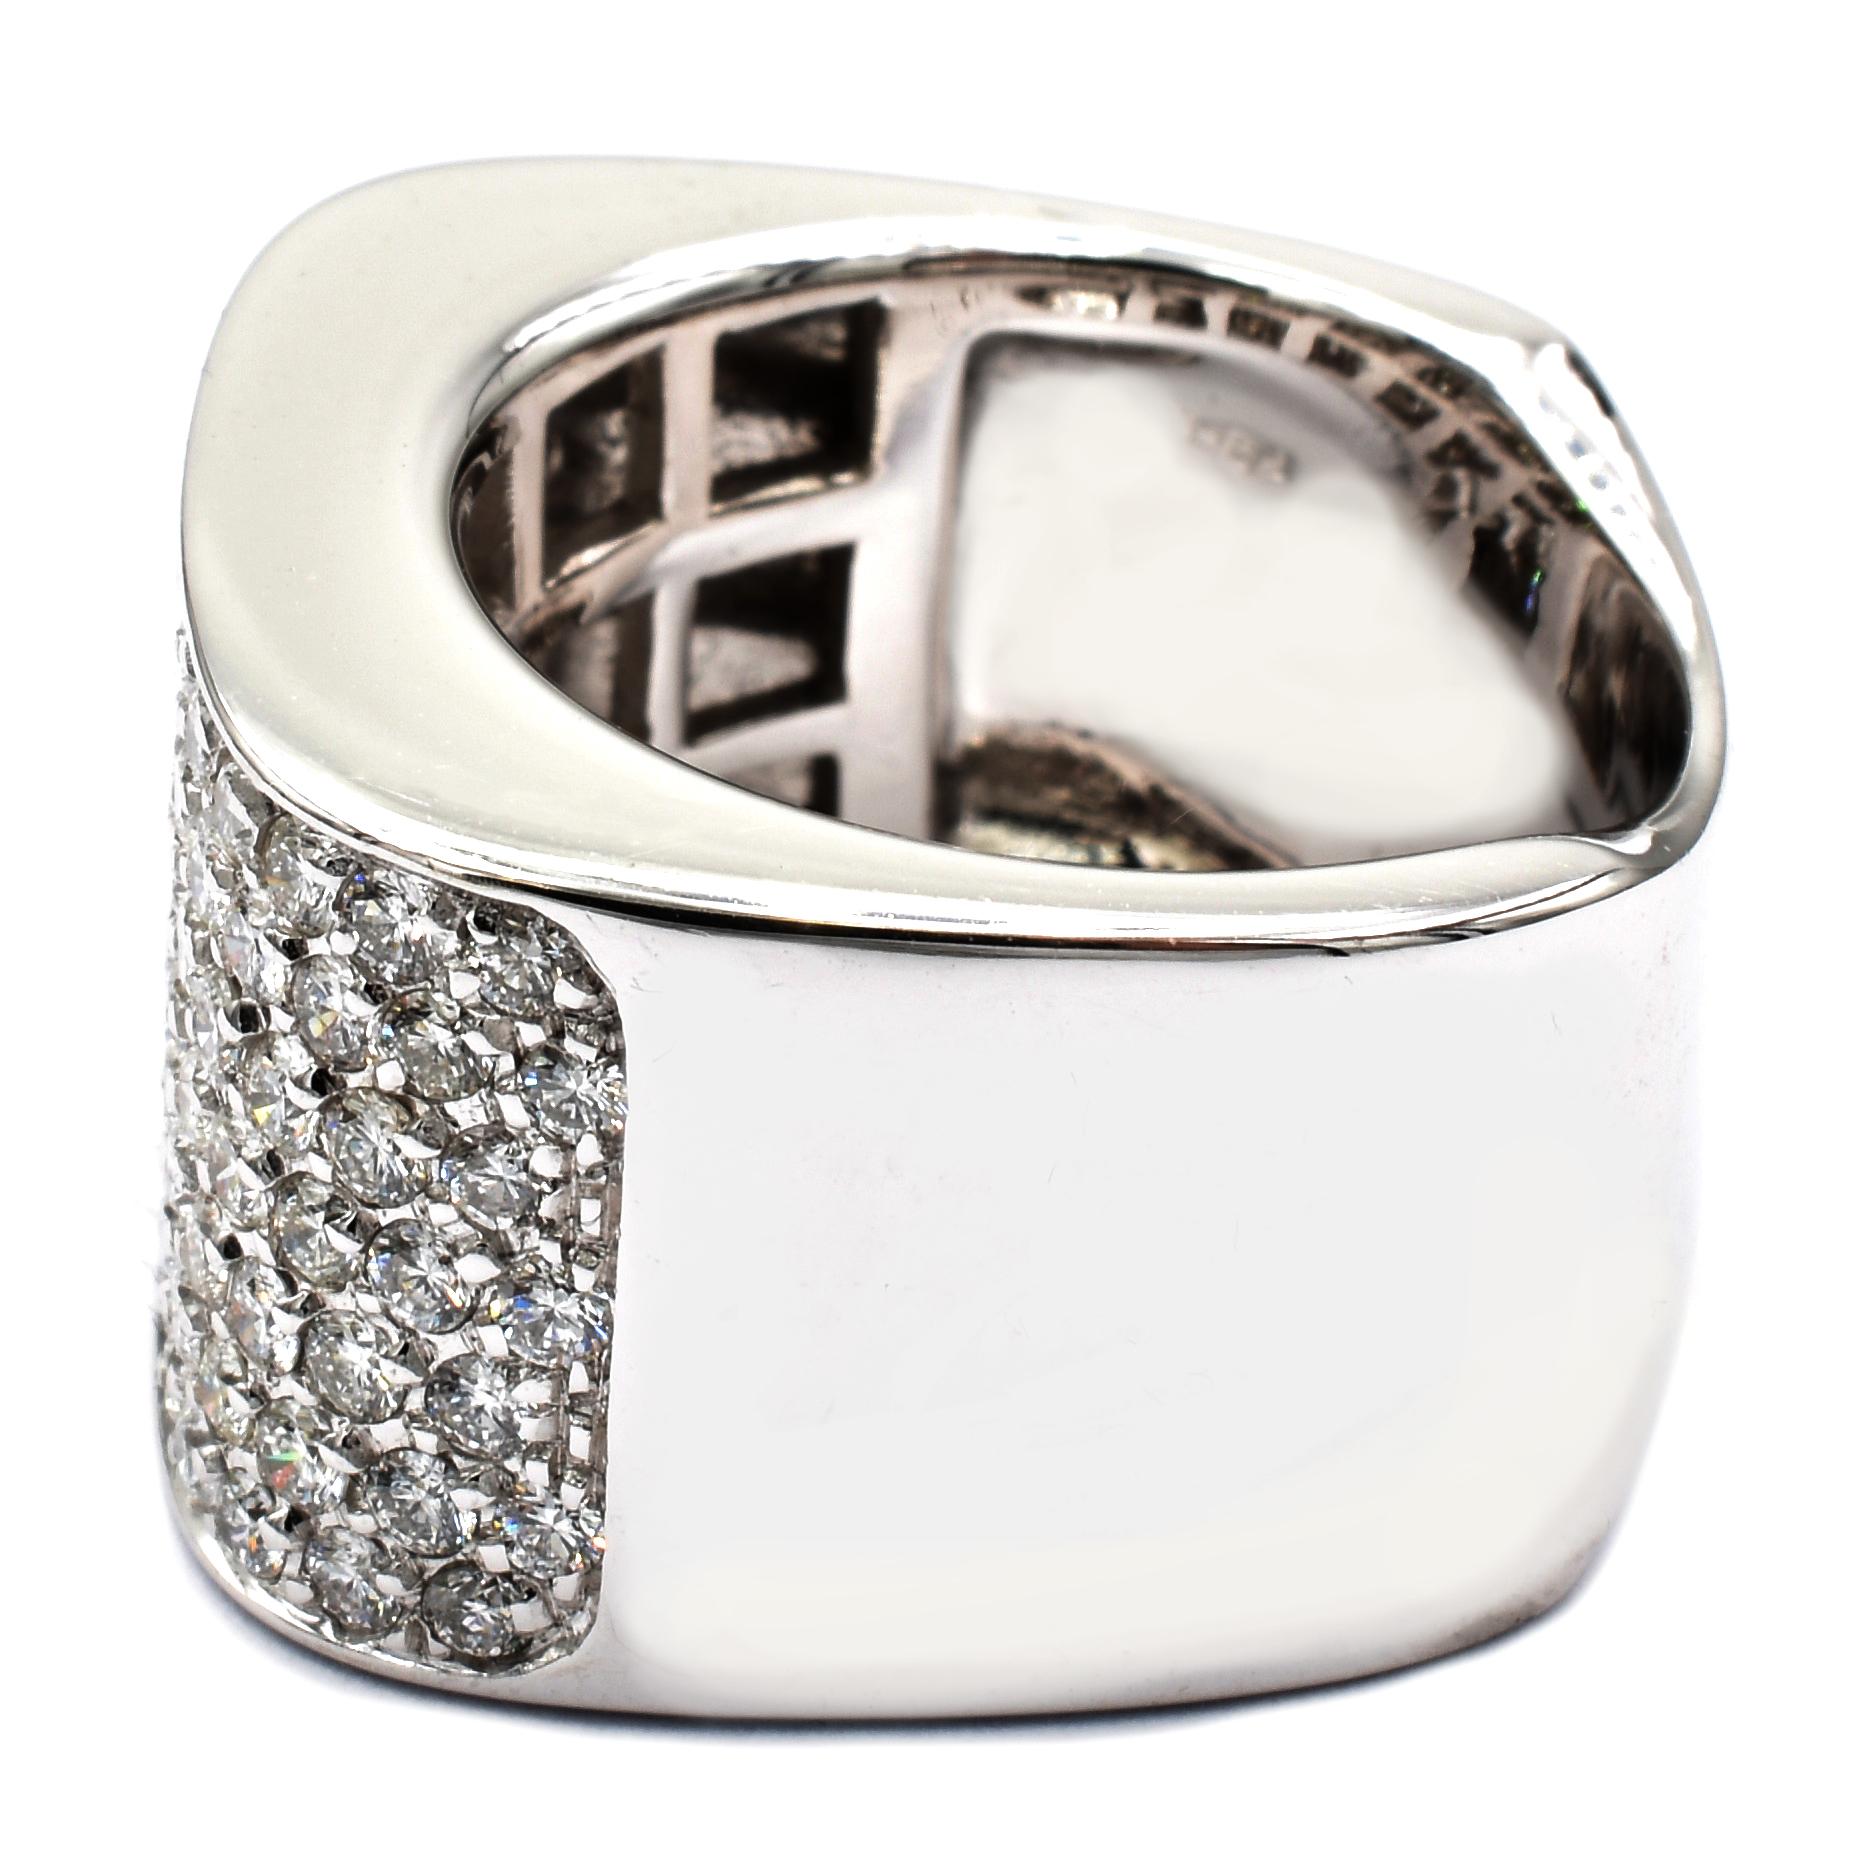 Contemporary Gilberto Cassola Diamond Paveè White Gold Square Ring Made in Italy For Sale